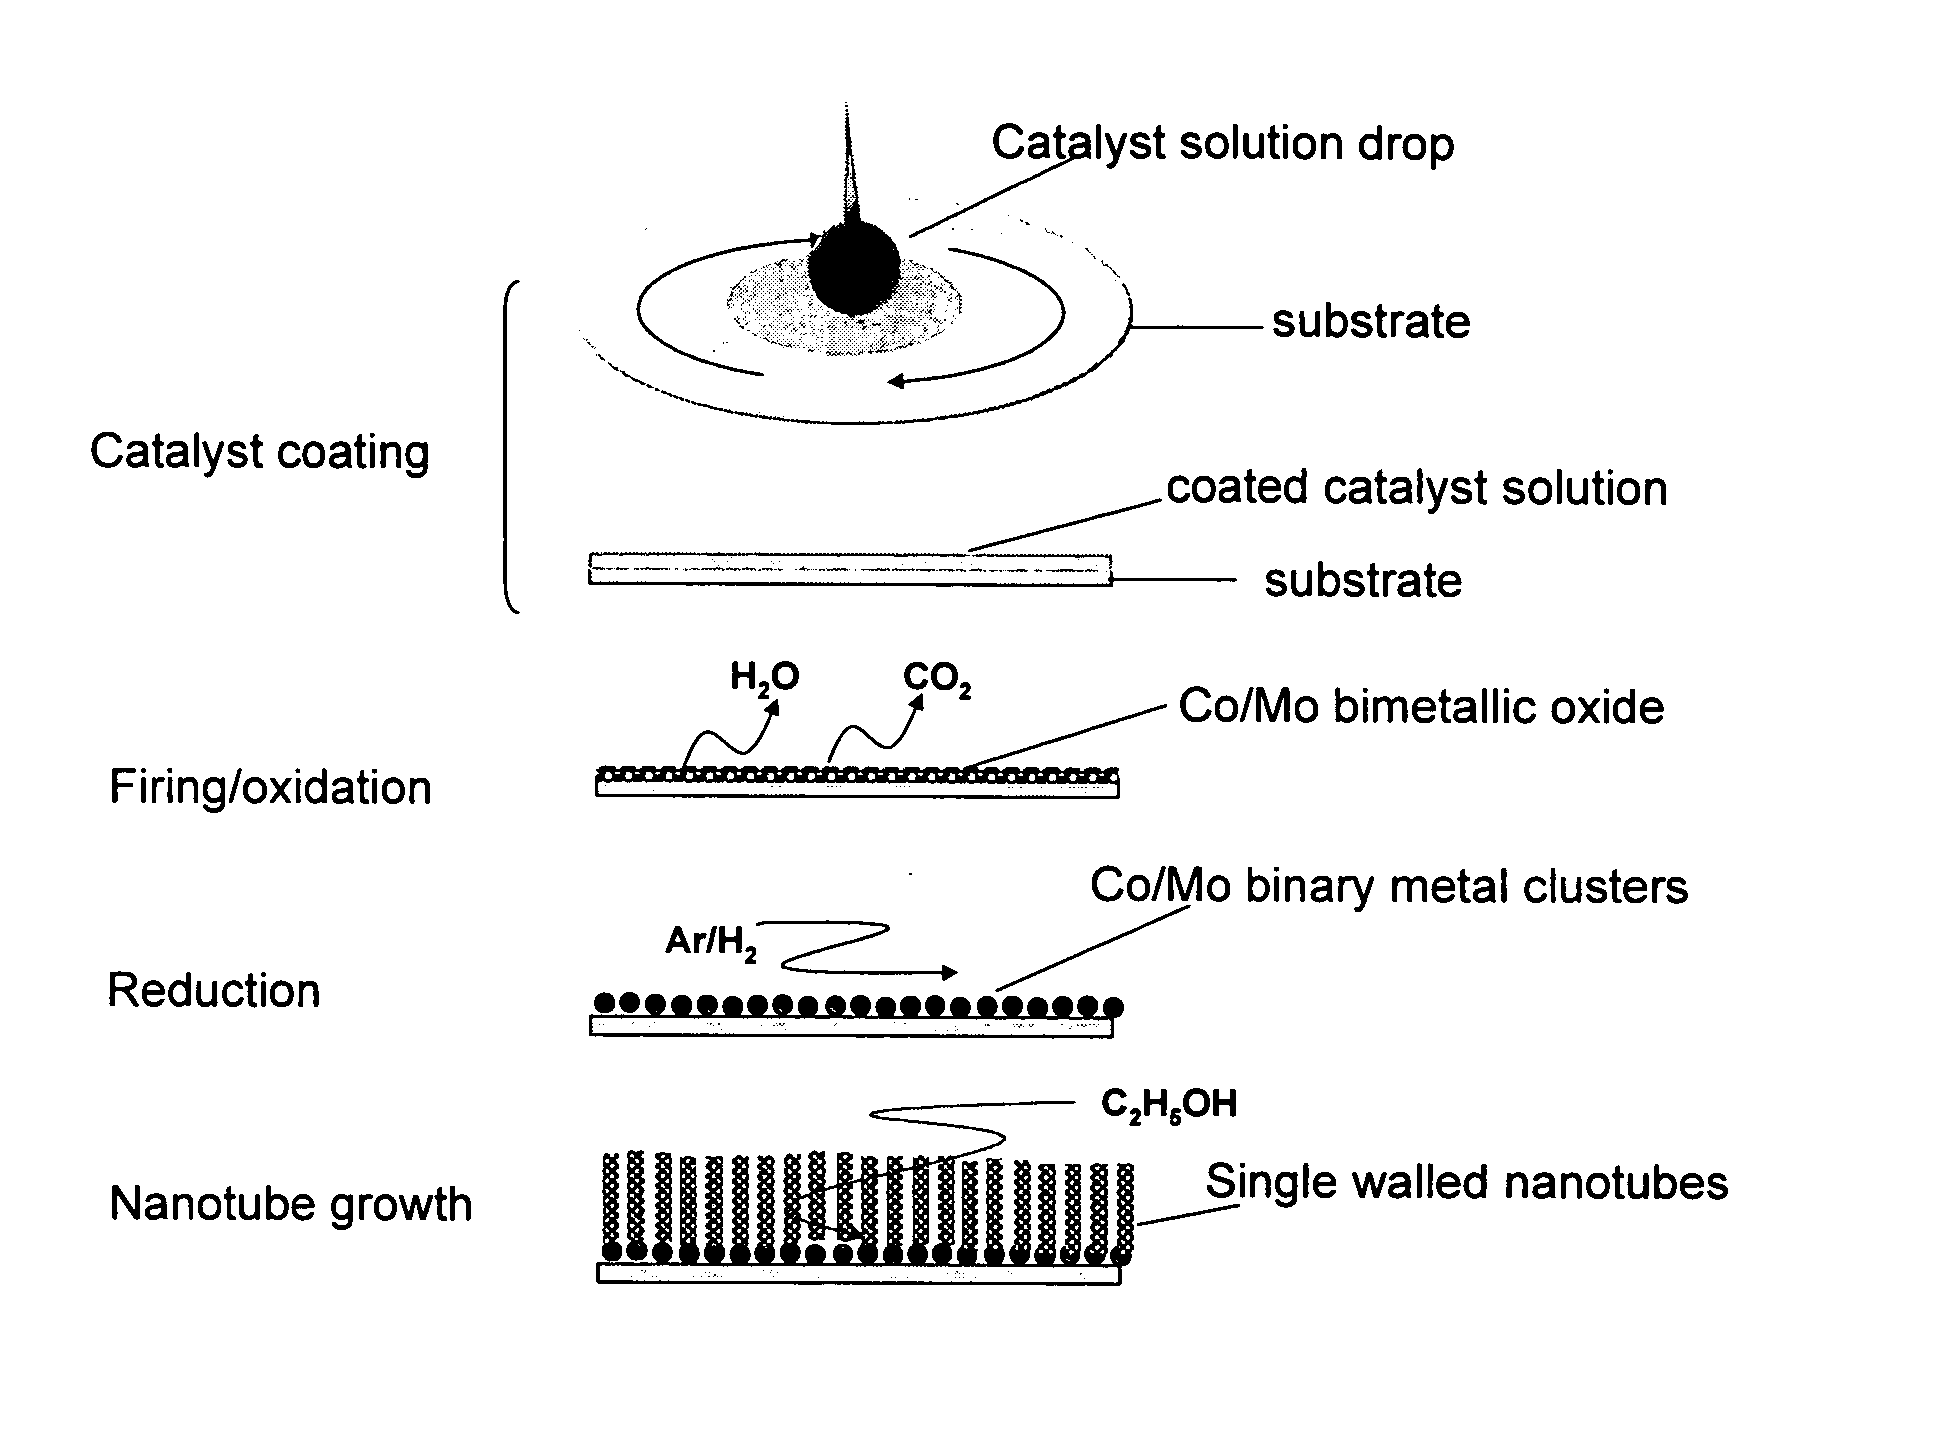 Array of single-walled carbon nanotubes and process for preparaton thereof